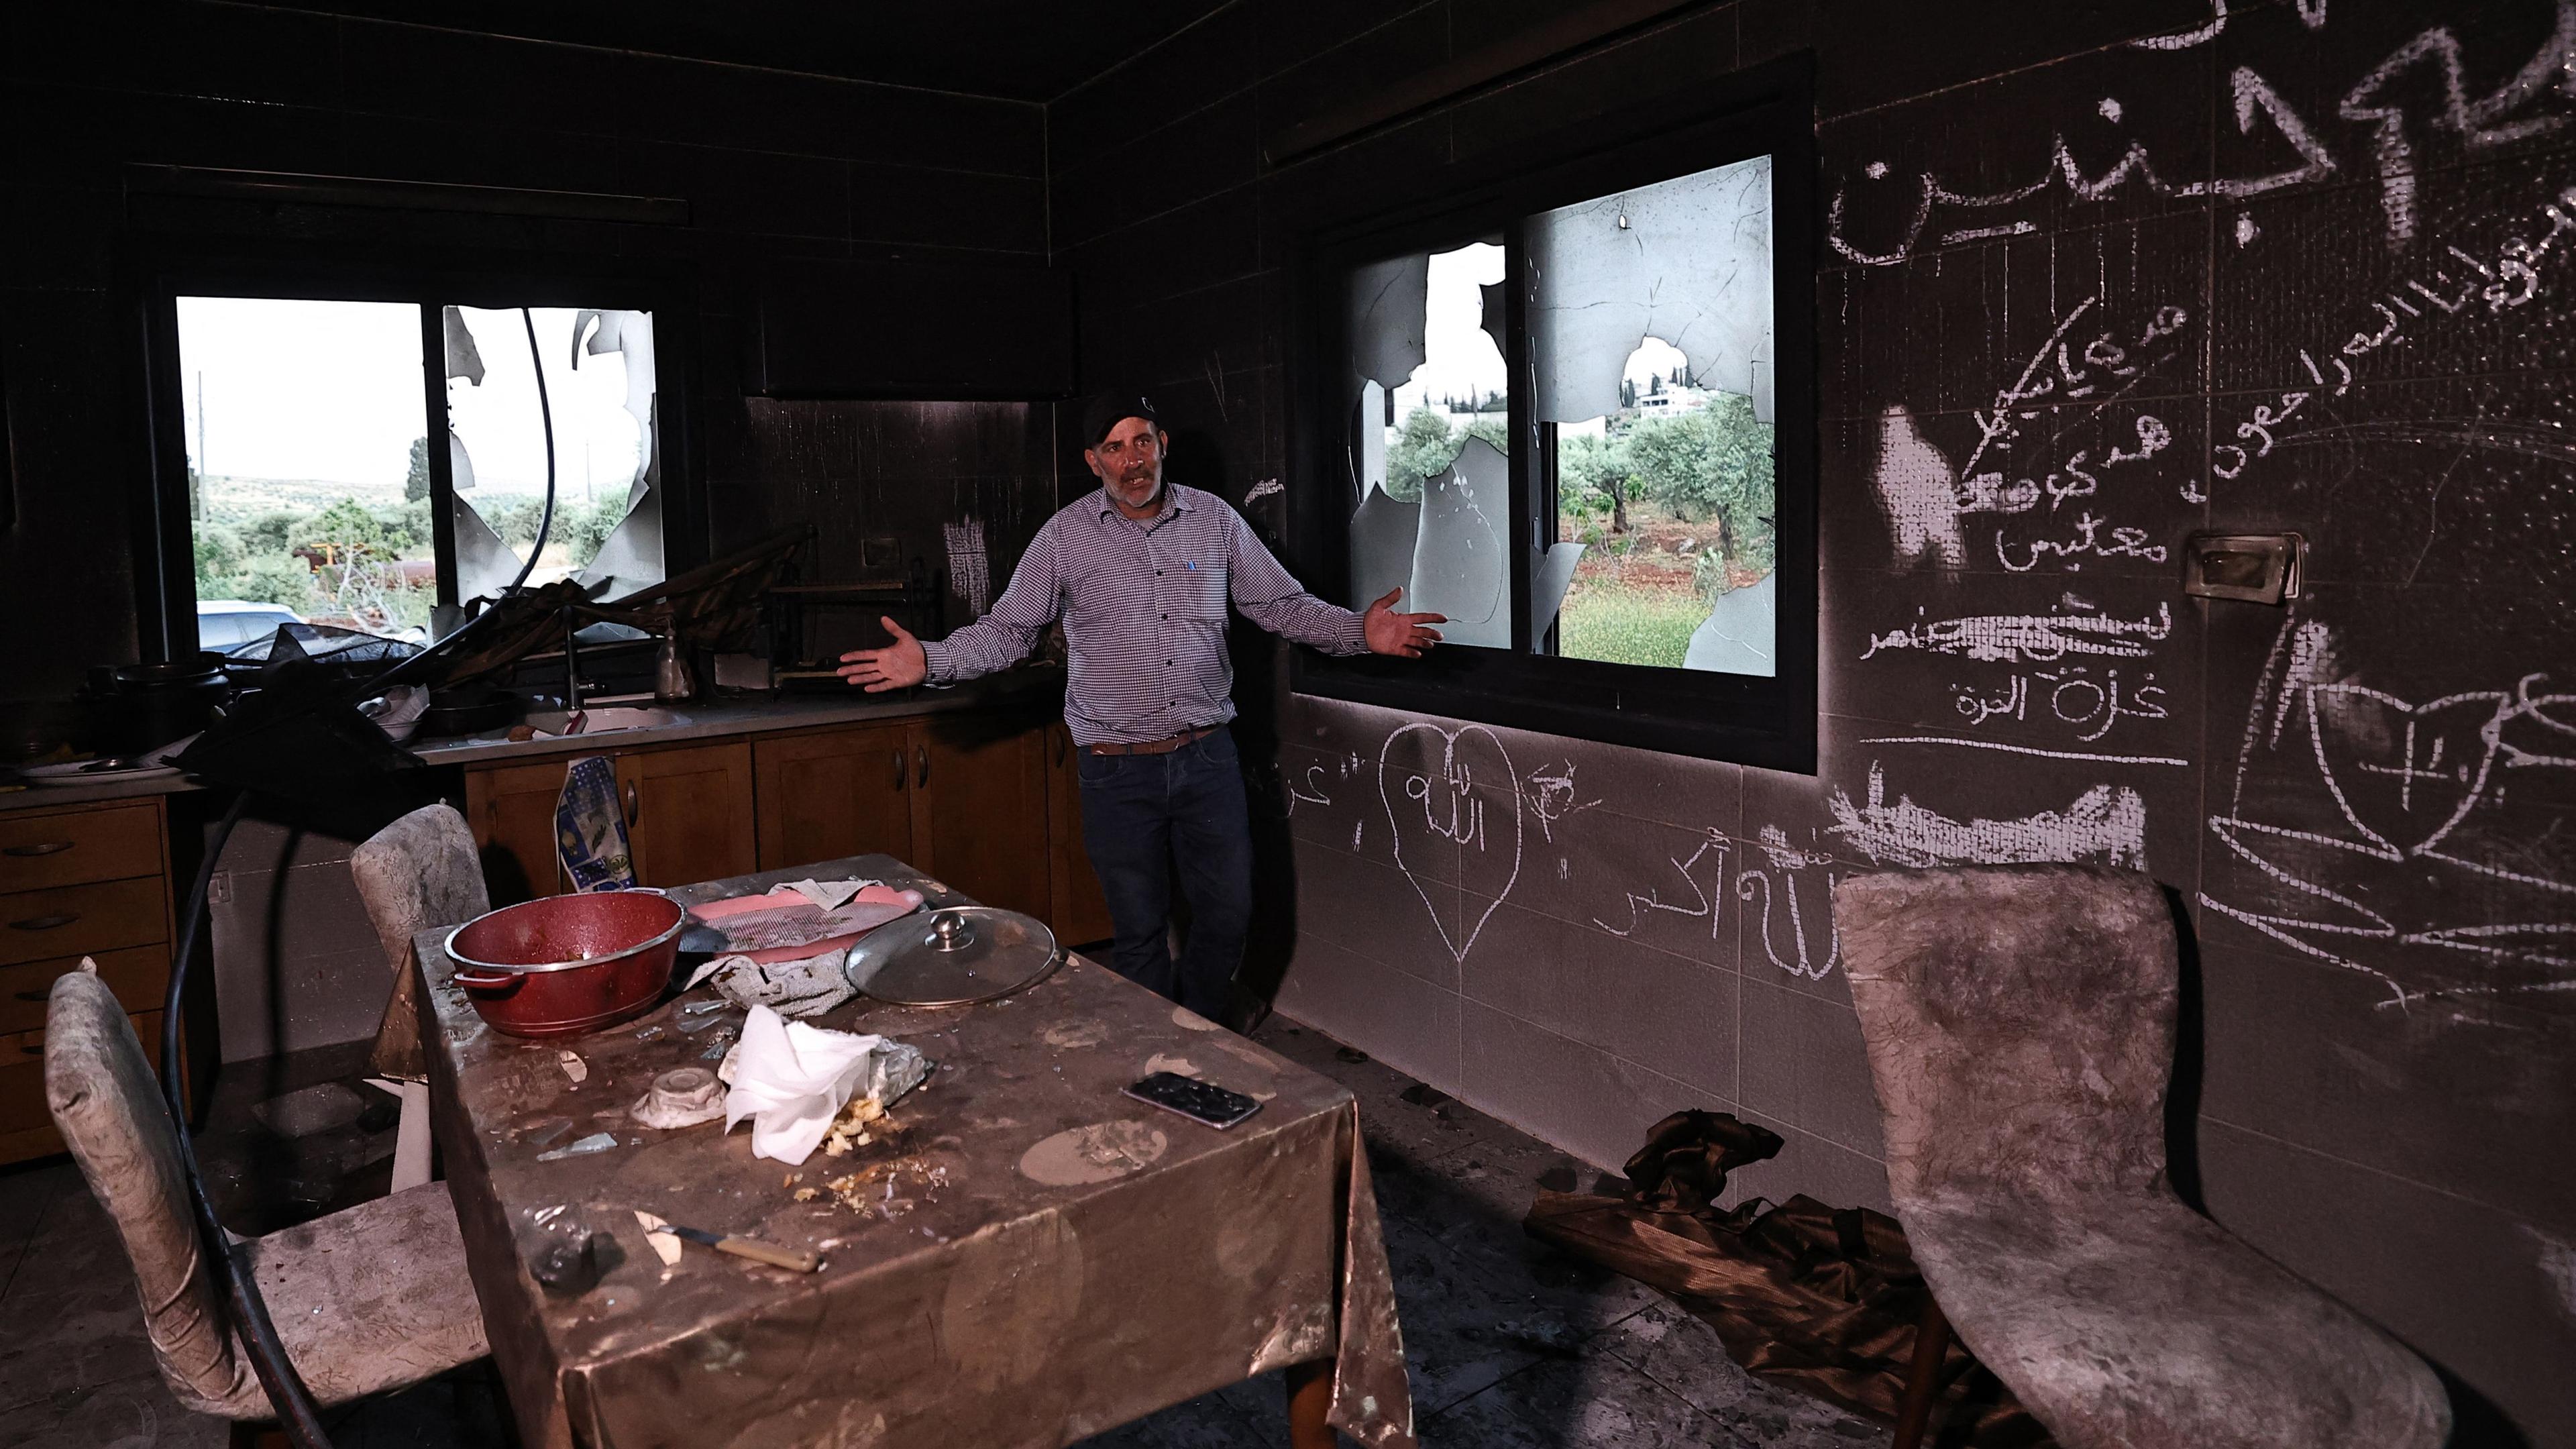 A Palestinian man gestures as he stands inside his kitchen on Wednesday after it was attacked by Israeli settlers in the occupied West Bank village of Al-Mughayyir near Ramallah.  